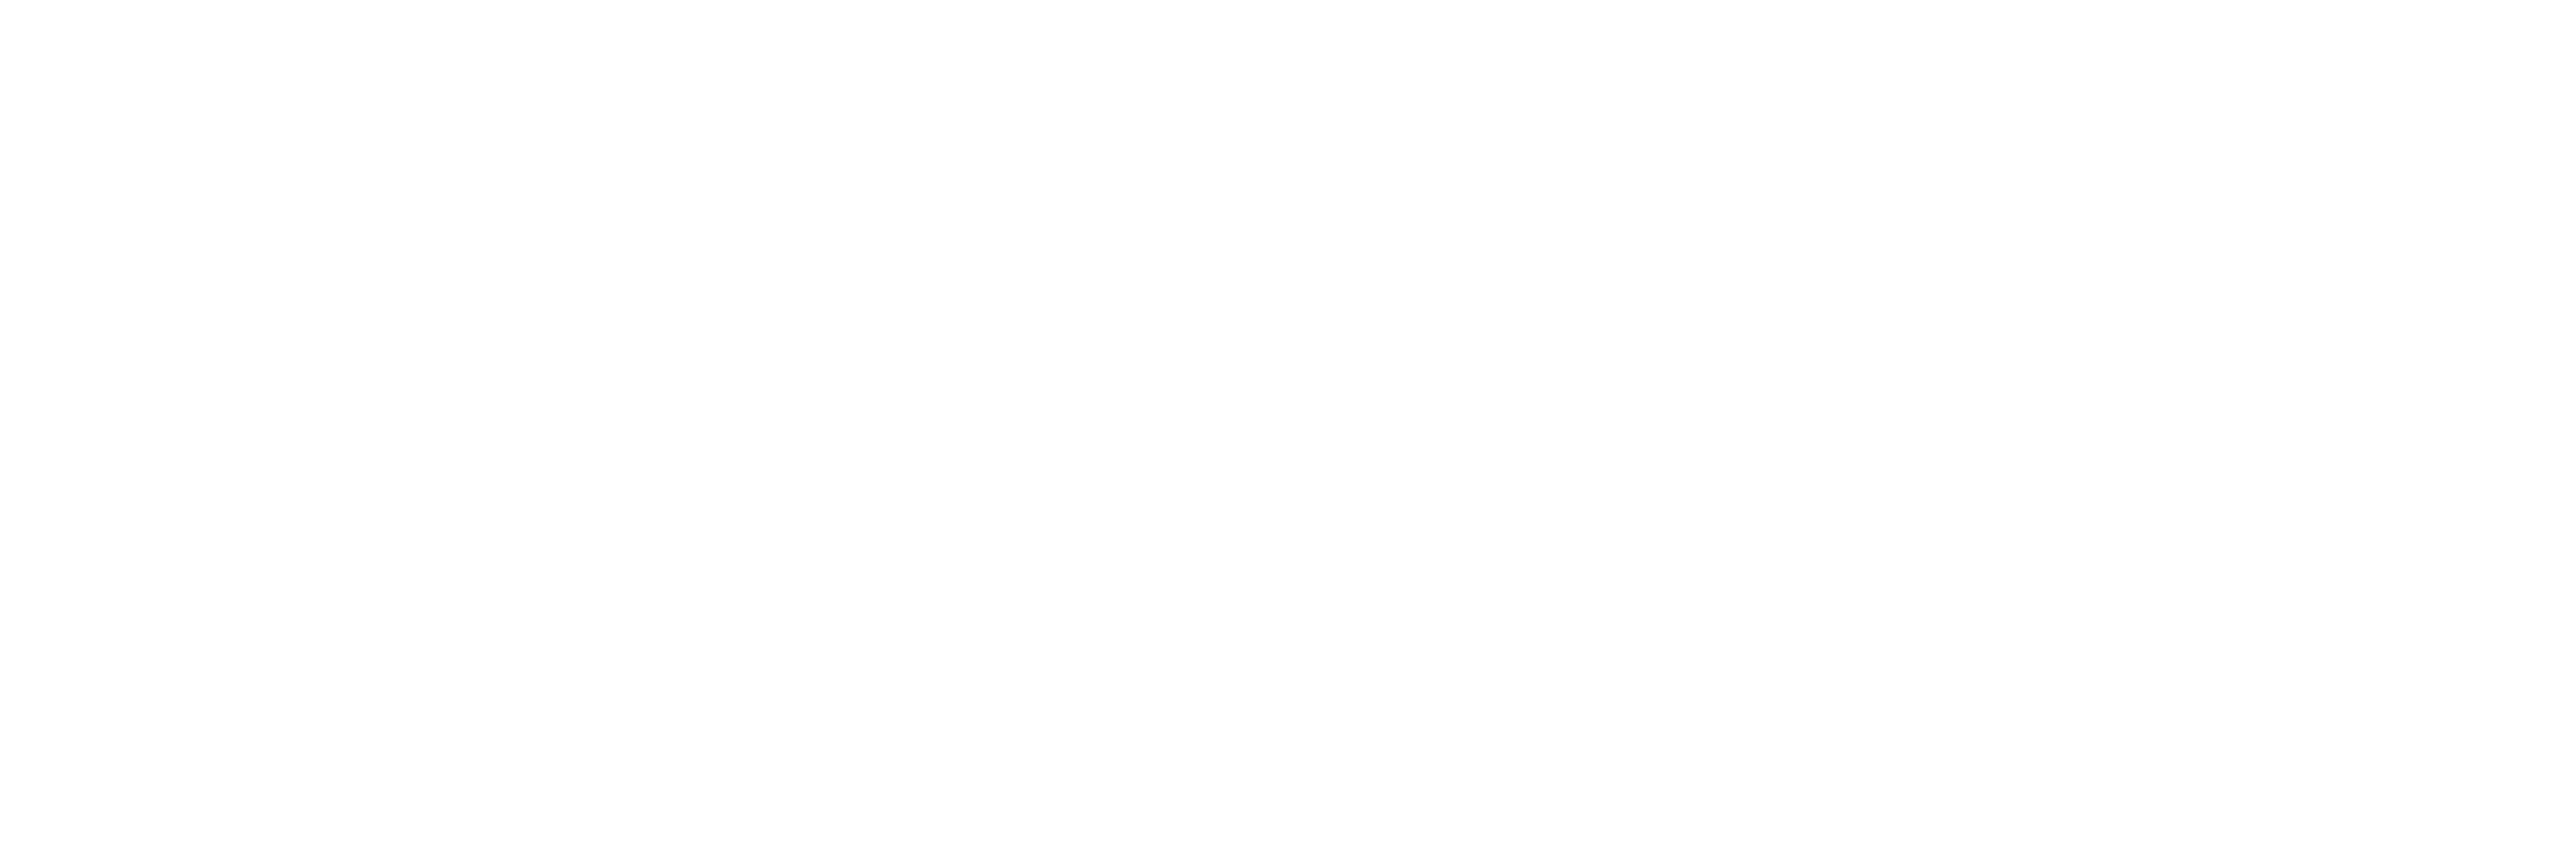 Fulton Forge Student Research Expo Logo